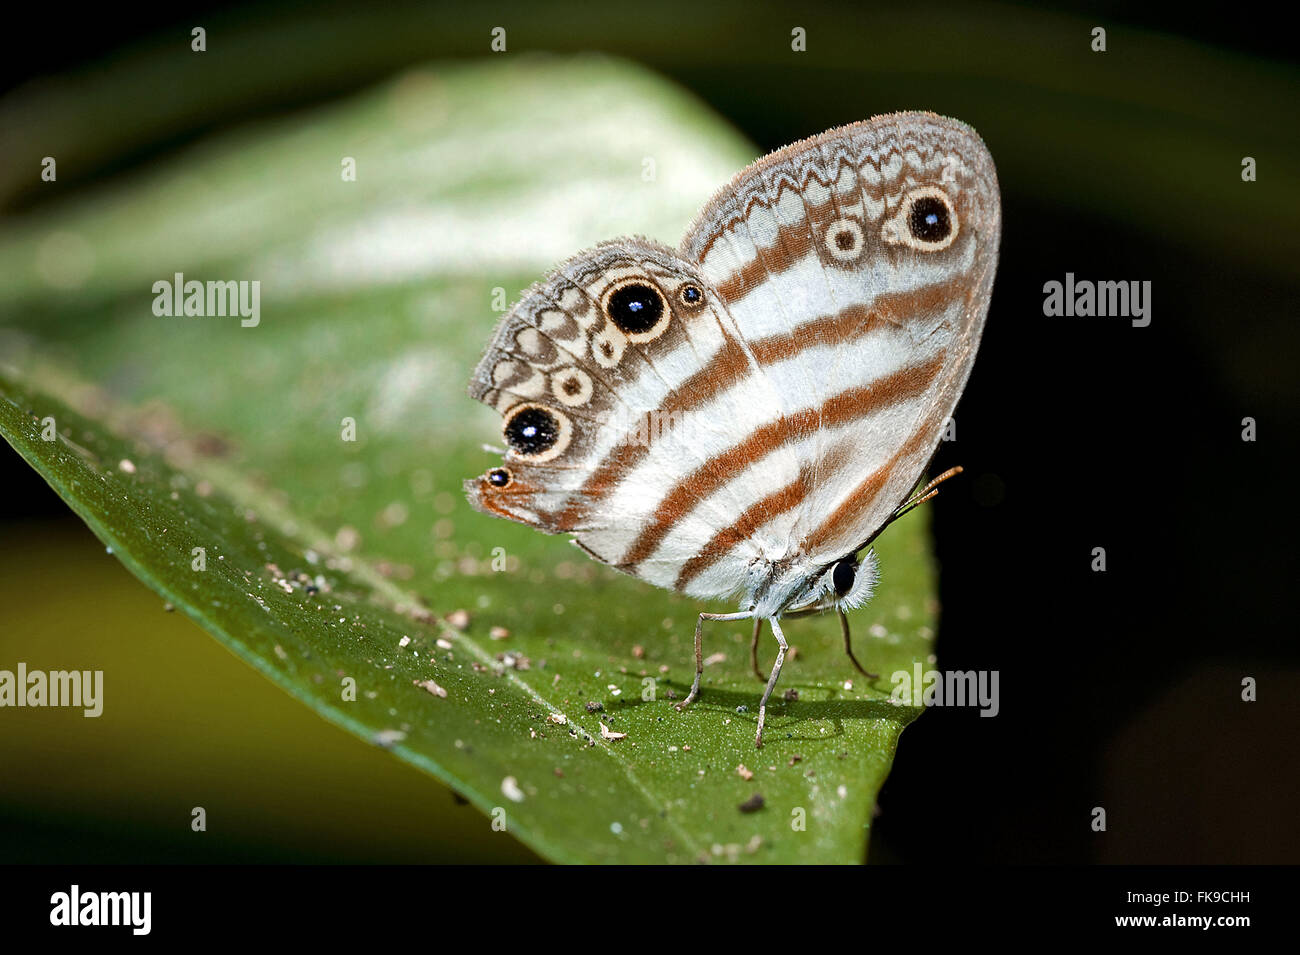 Amazonian butterfly perched on leaf Stock Photo